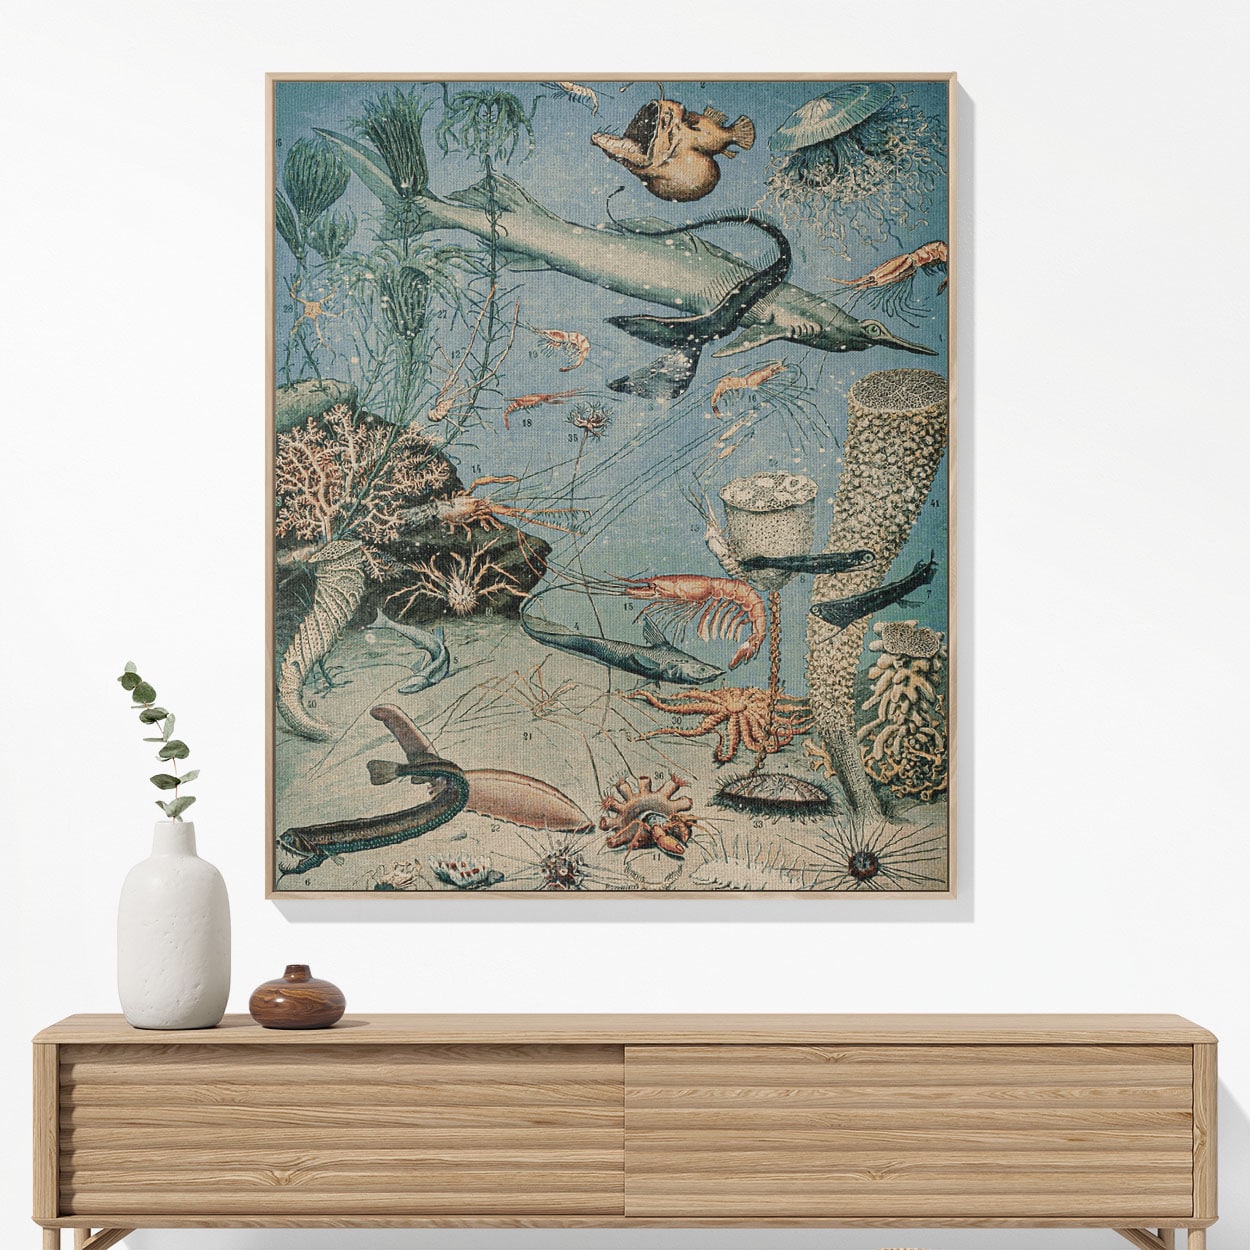 Sea Life Woven Blanket Woven Blanket Hanging on a Wall as Framed Wall Art